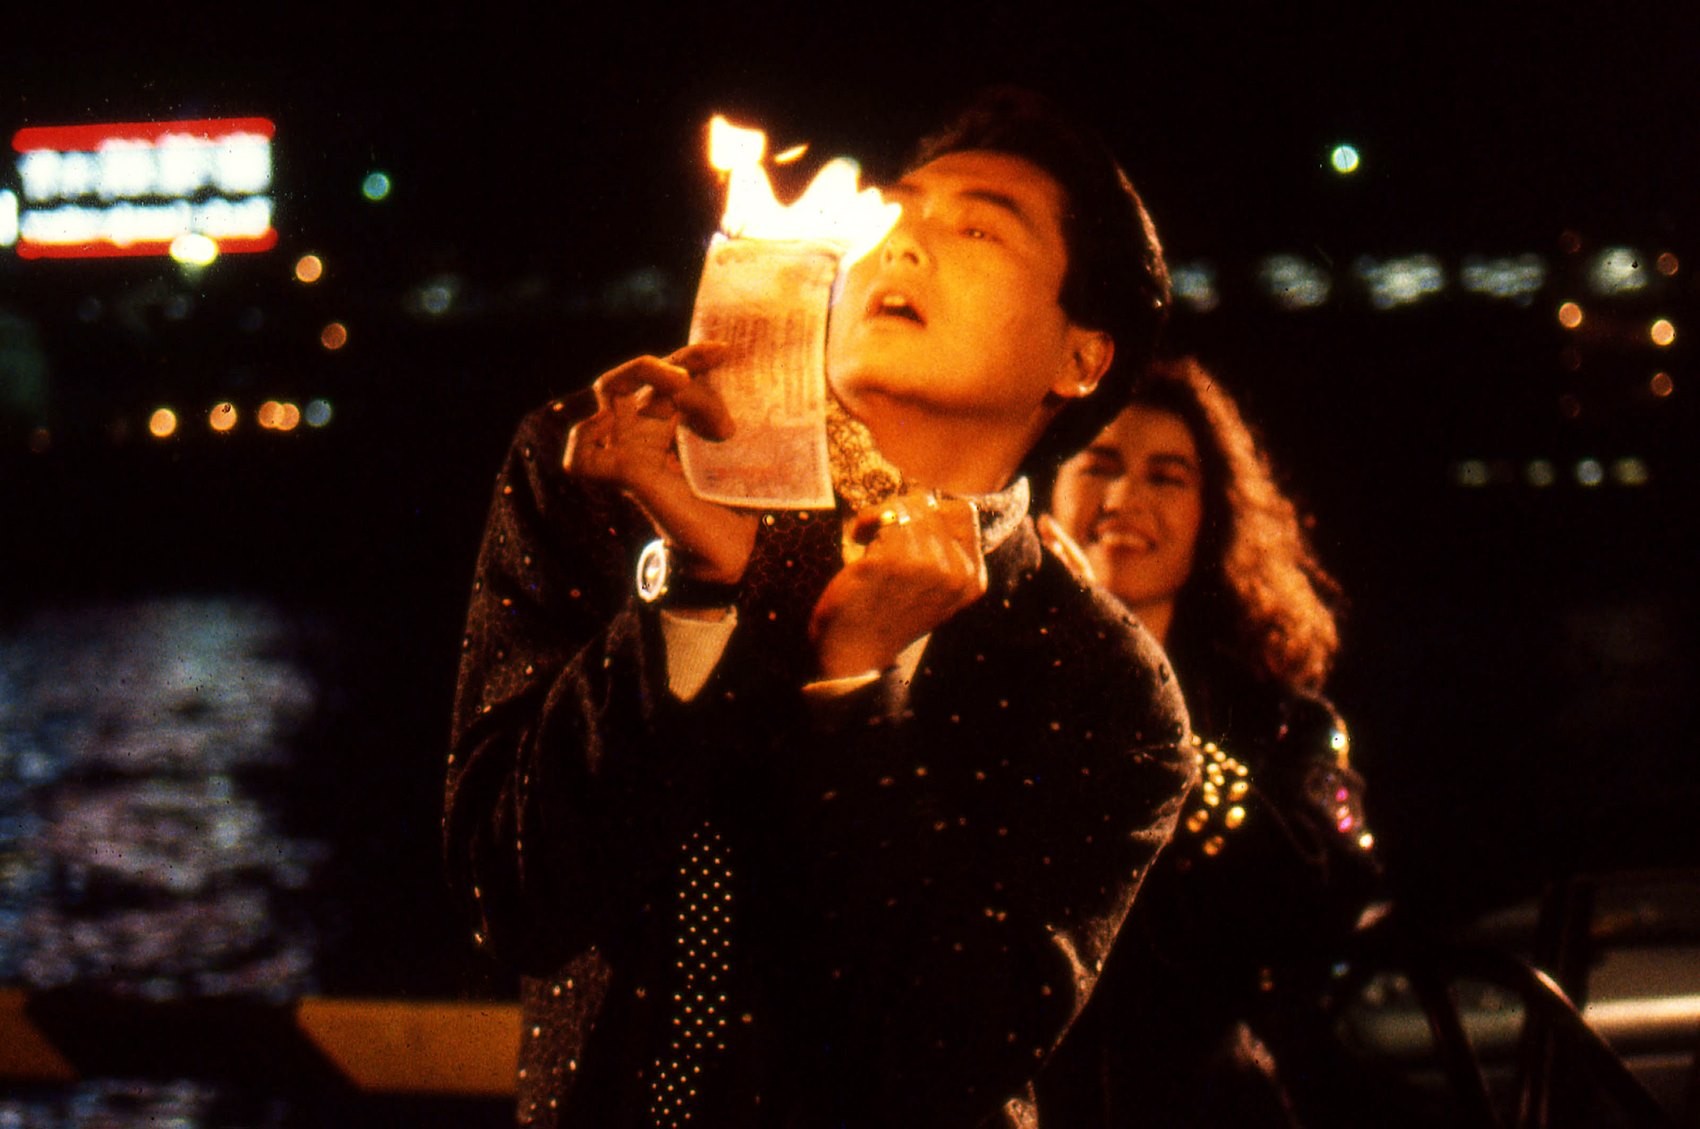 Hong Kong actor Chow Yun-fat on comedy film “The Eighth Happiness.” Tsim Sha Tsui, 1987. Photo: Greg Girard, courtesy of Blue Lotus Gallery.